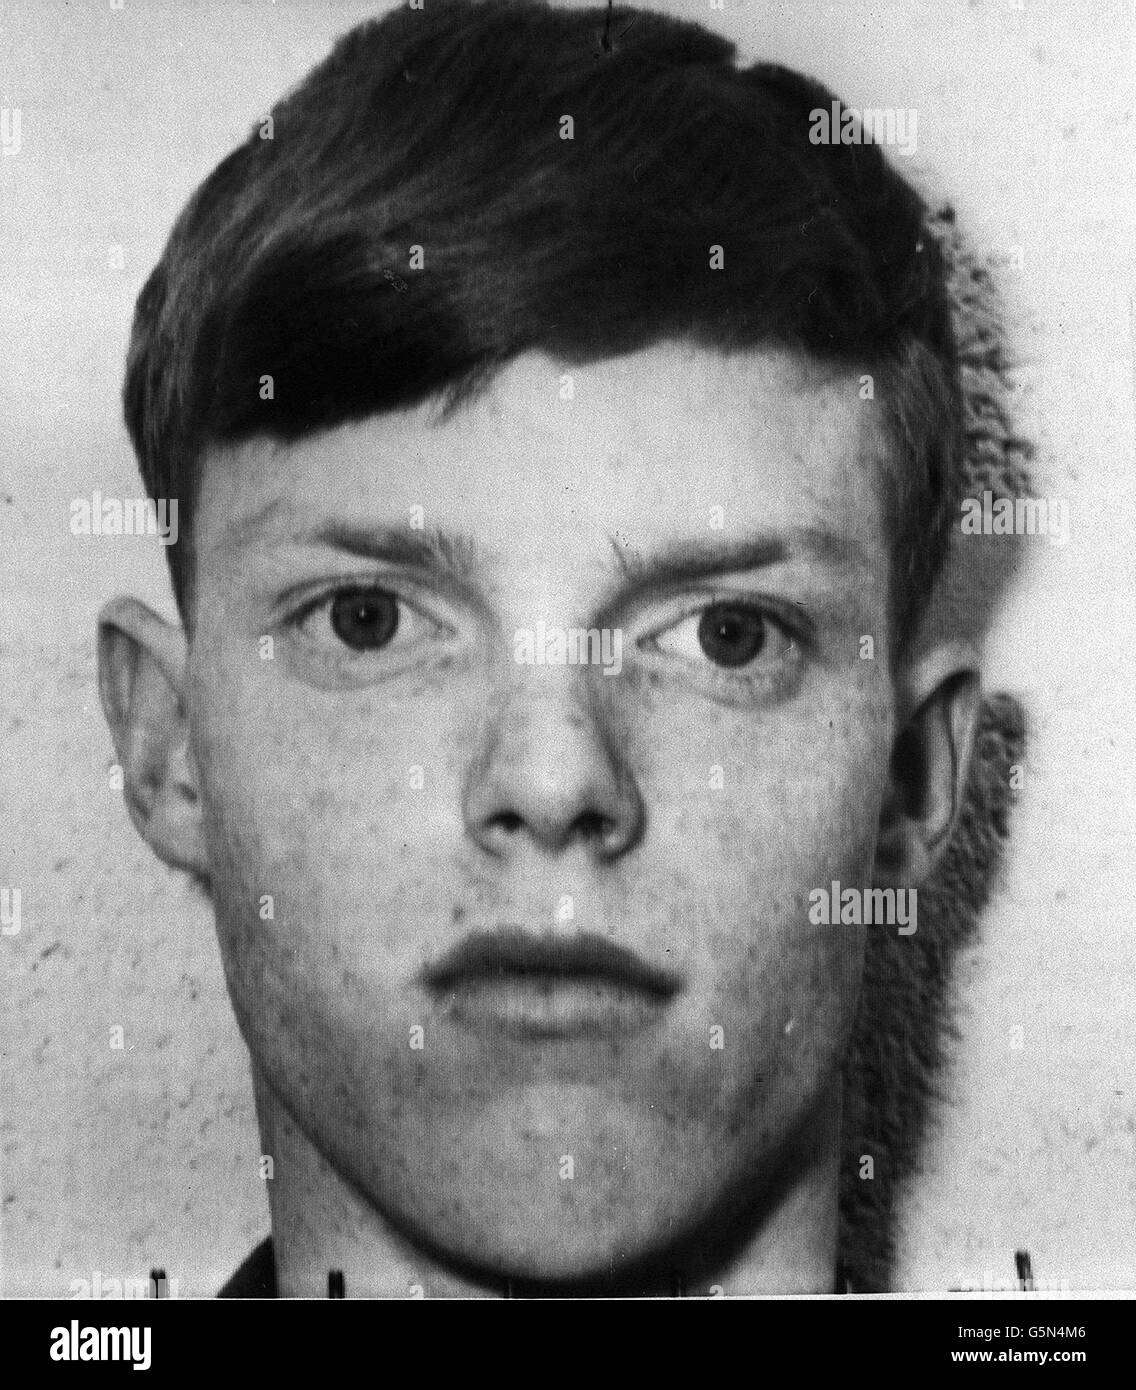 A portrait of Private Keith Leslie Bryan of Bristol, who was shot dead in the Lower Falls area of Belfast. Stock Photo